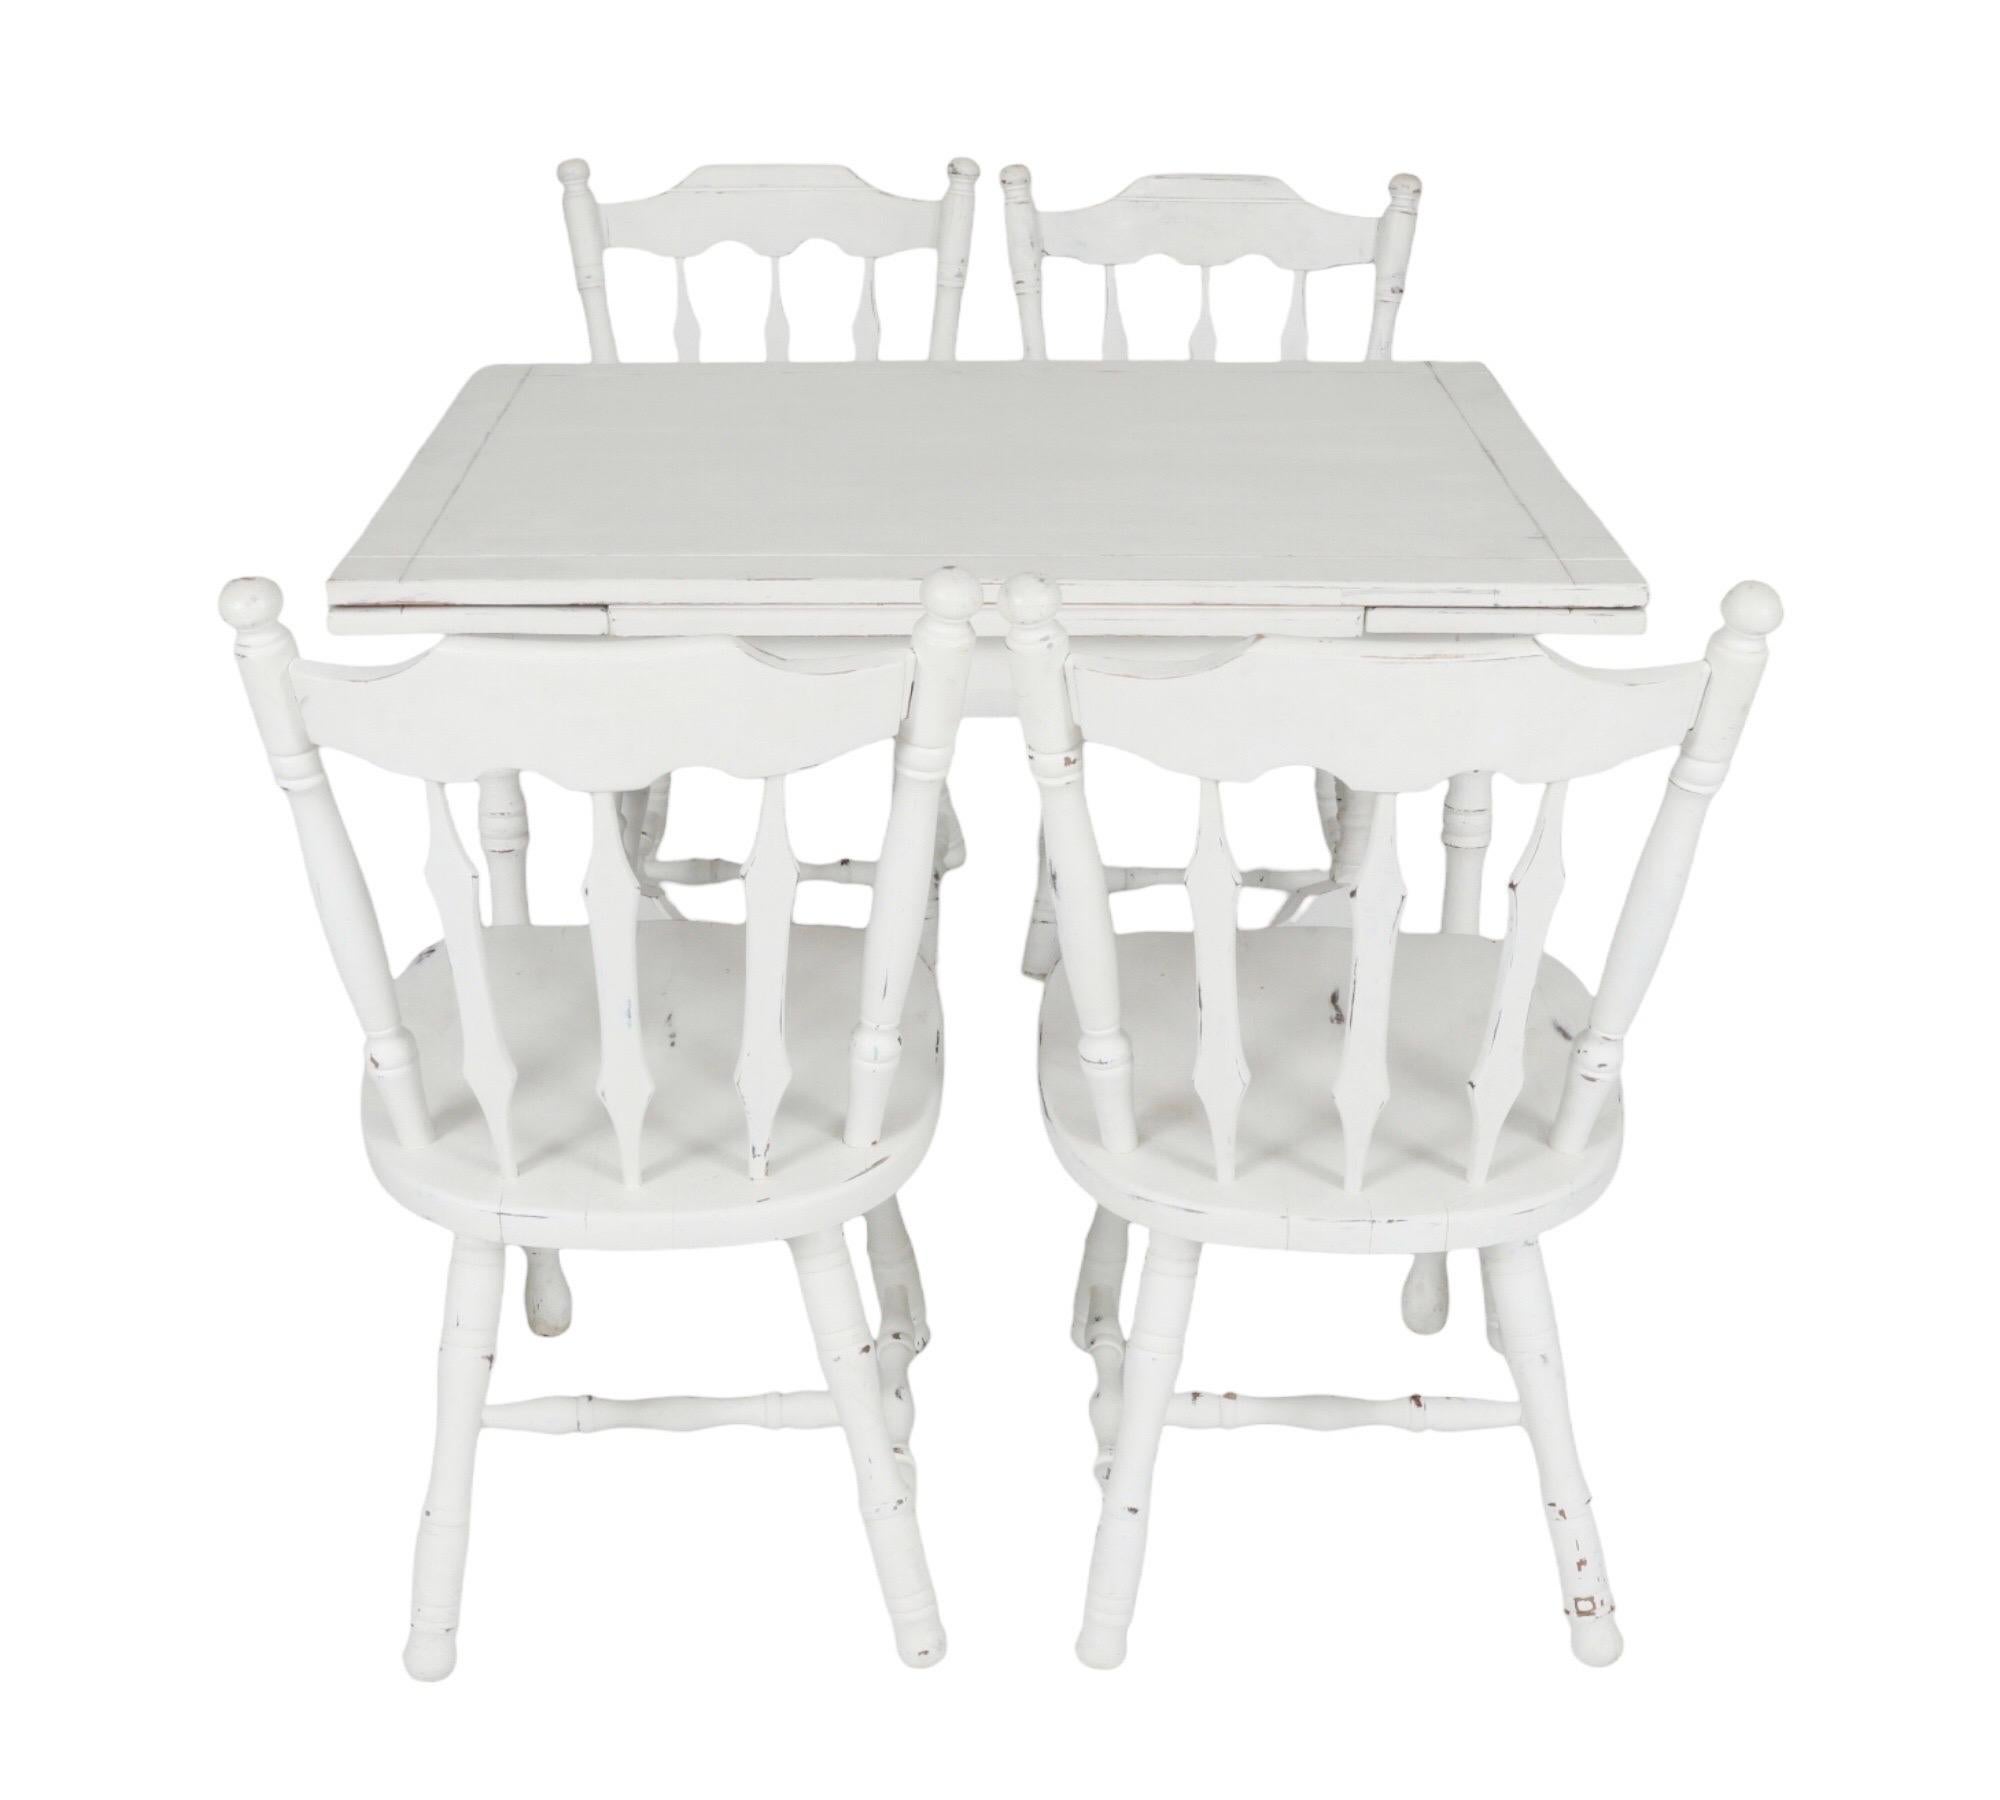 A white farmhouse kitchen table with four matching dining chairs. The table extends with two pull out leaves to seat six. The table is decorated with a carved line border and stands on turned legs secured with an ‘x’ stretcher. Four side chairs have